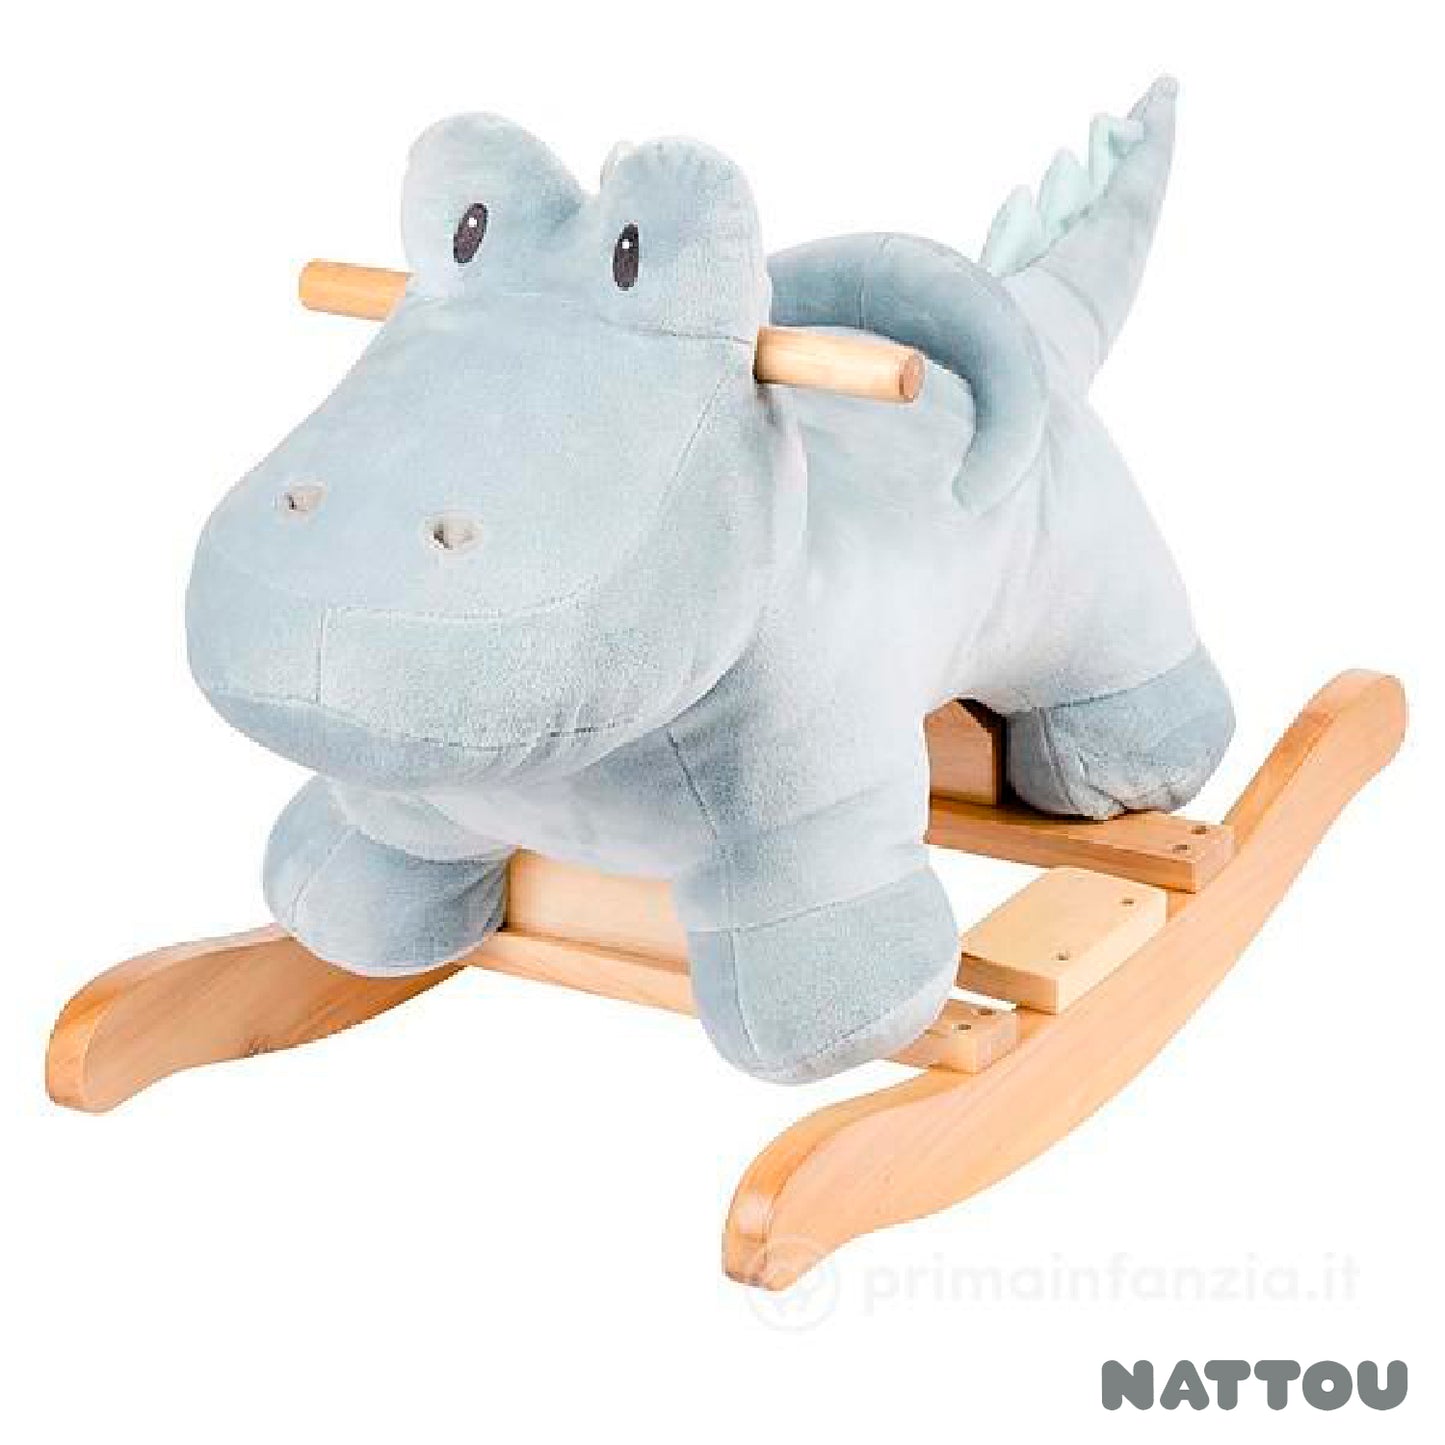 Nattou - Crocco rocking chair (without belt) - NEW 730808